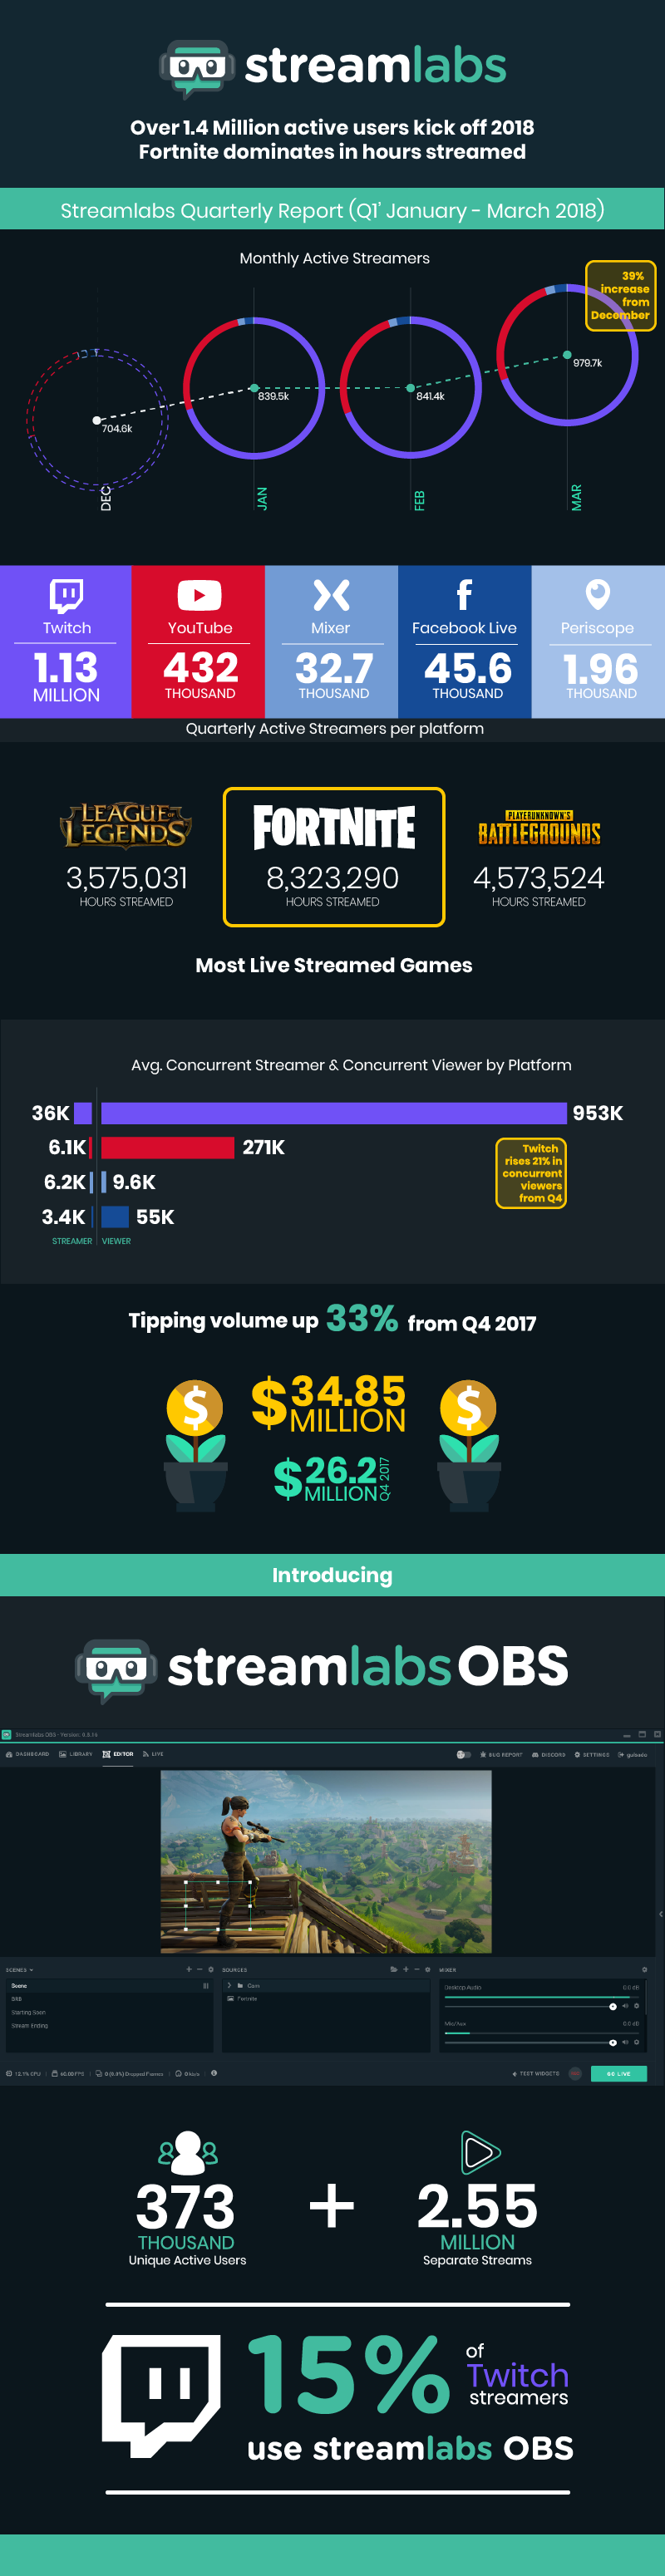 Tipping Up 33 Twitch Viewers Up 21 Fortnite Dominates Q1 18 - tipping up 33 twitch viewers up 21 fortnite dominates q1 18 streamlabs report